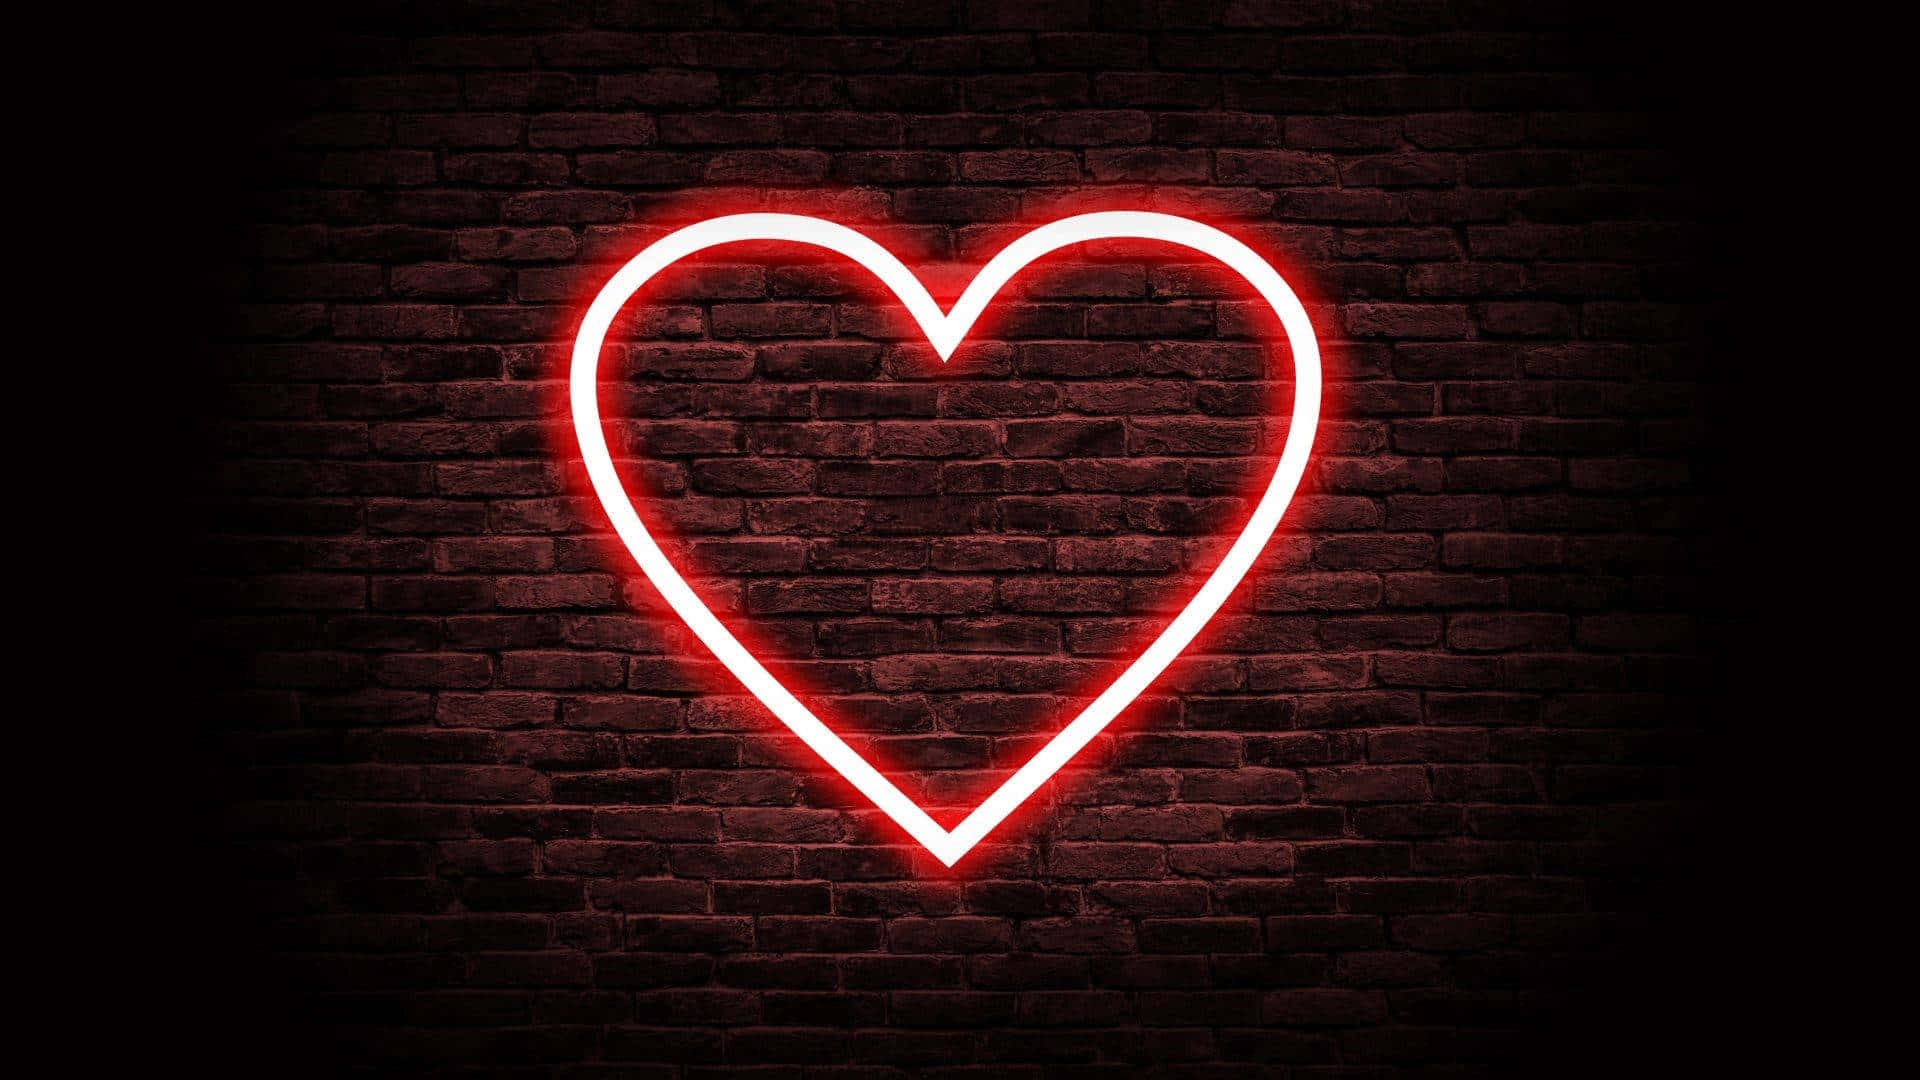 A neon heart sign on brick wall - Neon red